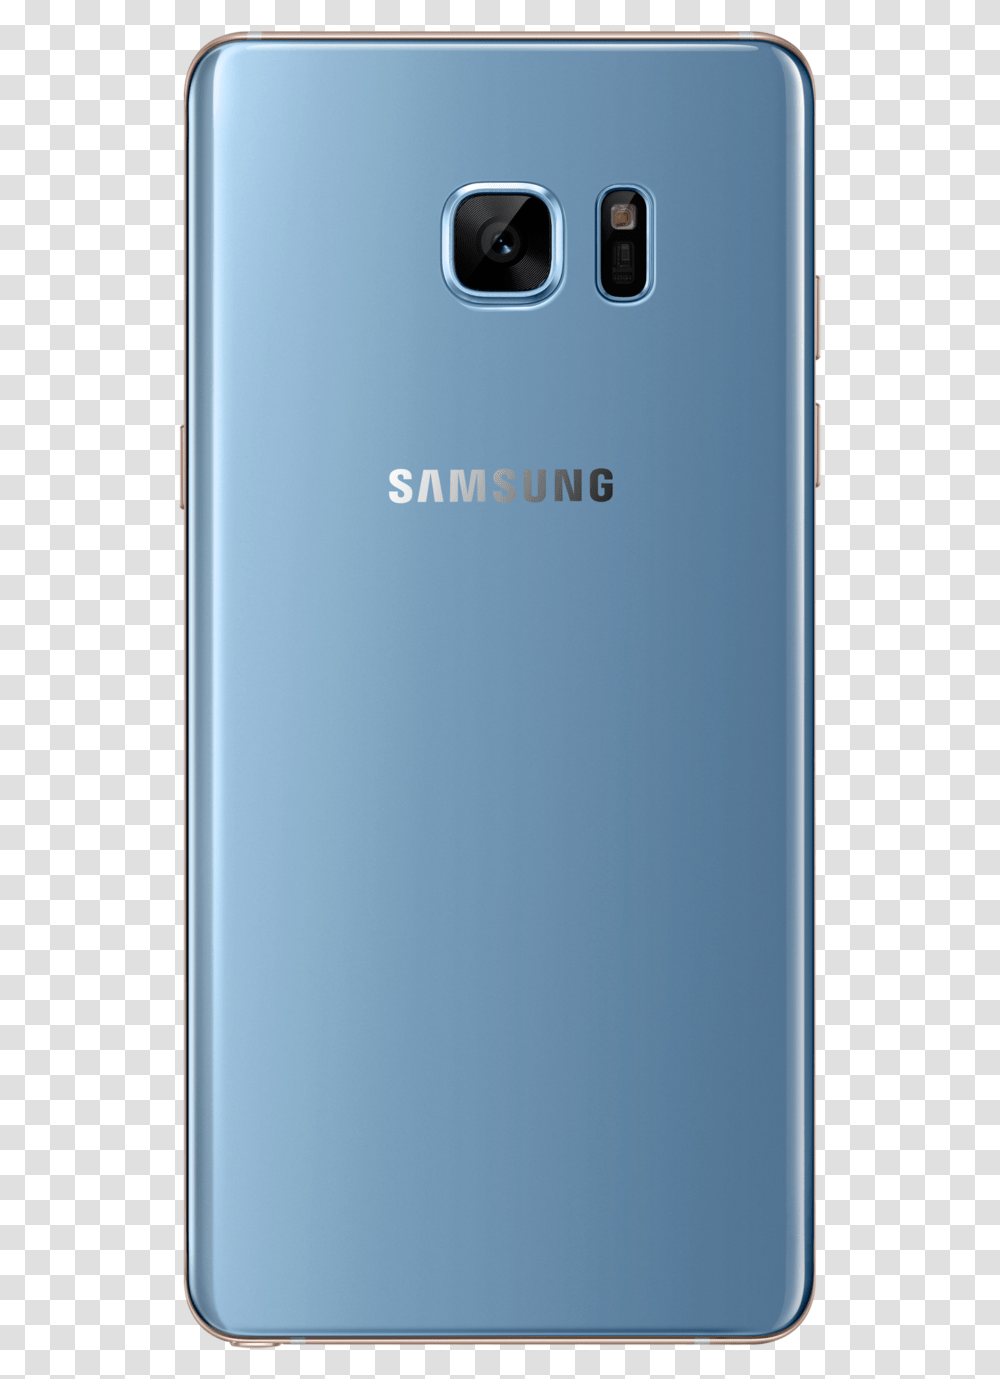 Galaxy Note7 Harga Hp Samsung Note, Mobile Phone, Electronics, Cell Phone, Iphone Transparent Png